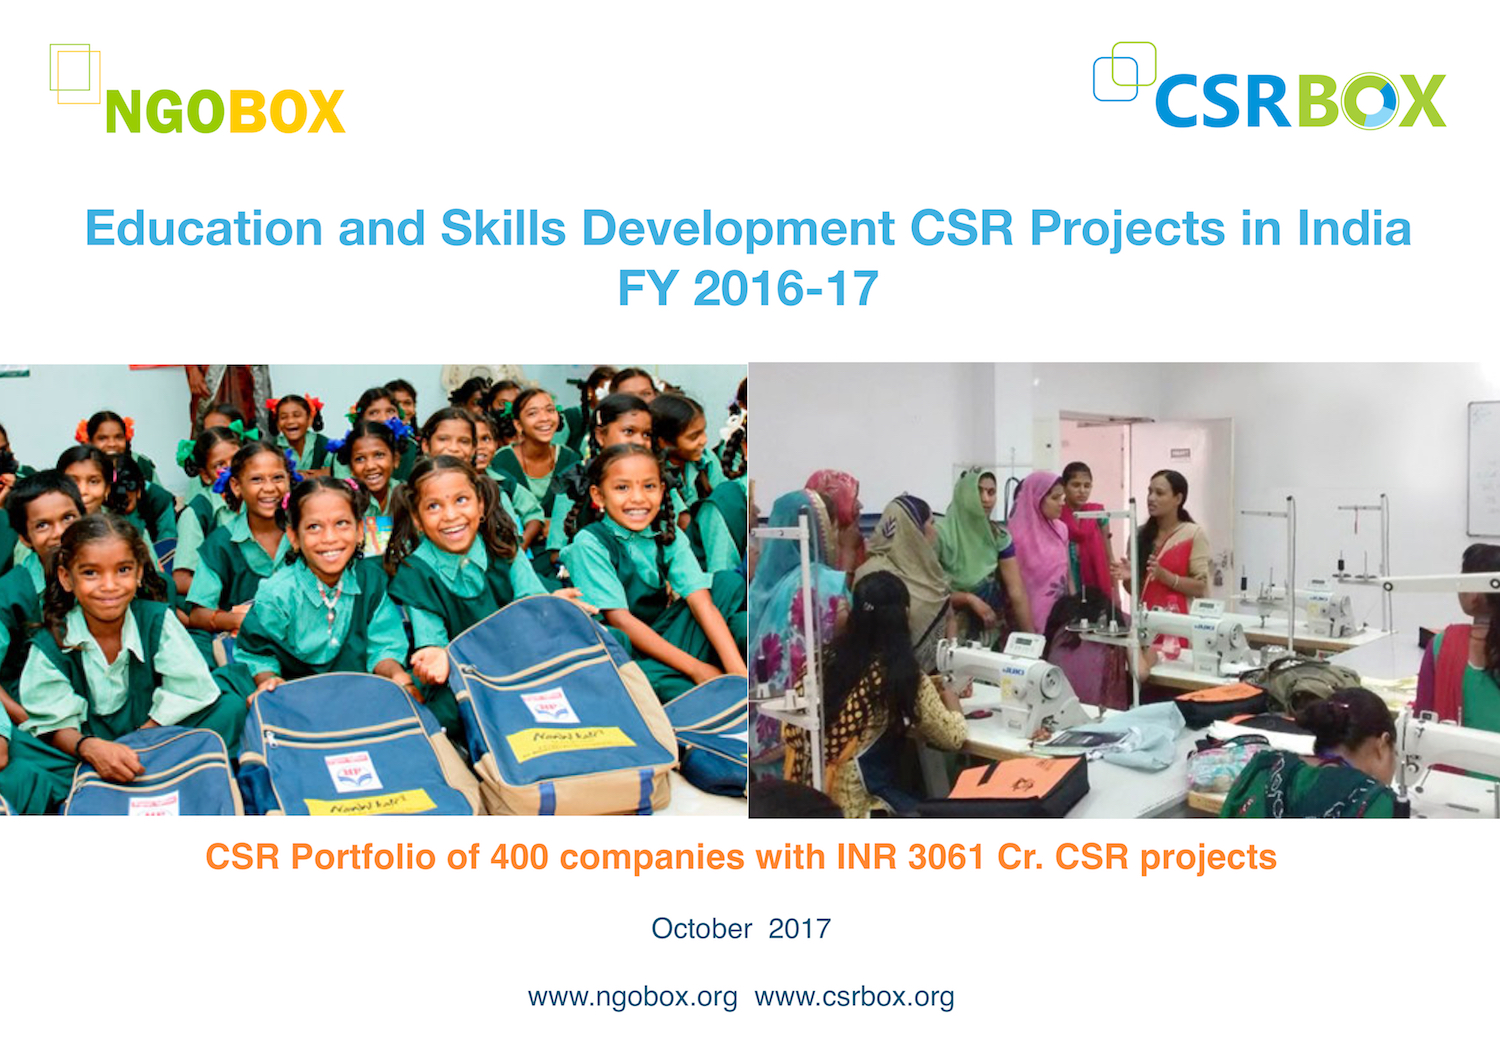 Education and Skills Development CSR Projects in India (FY 2016-17)